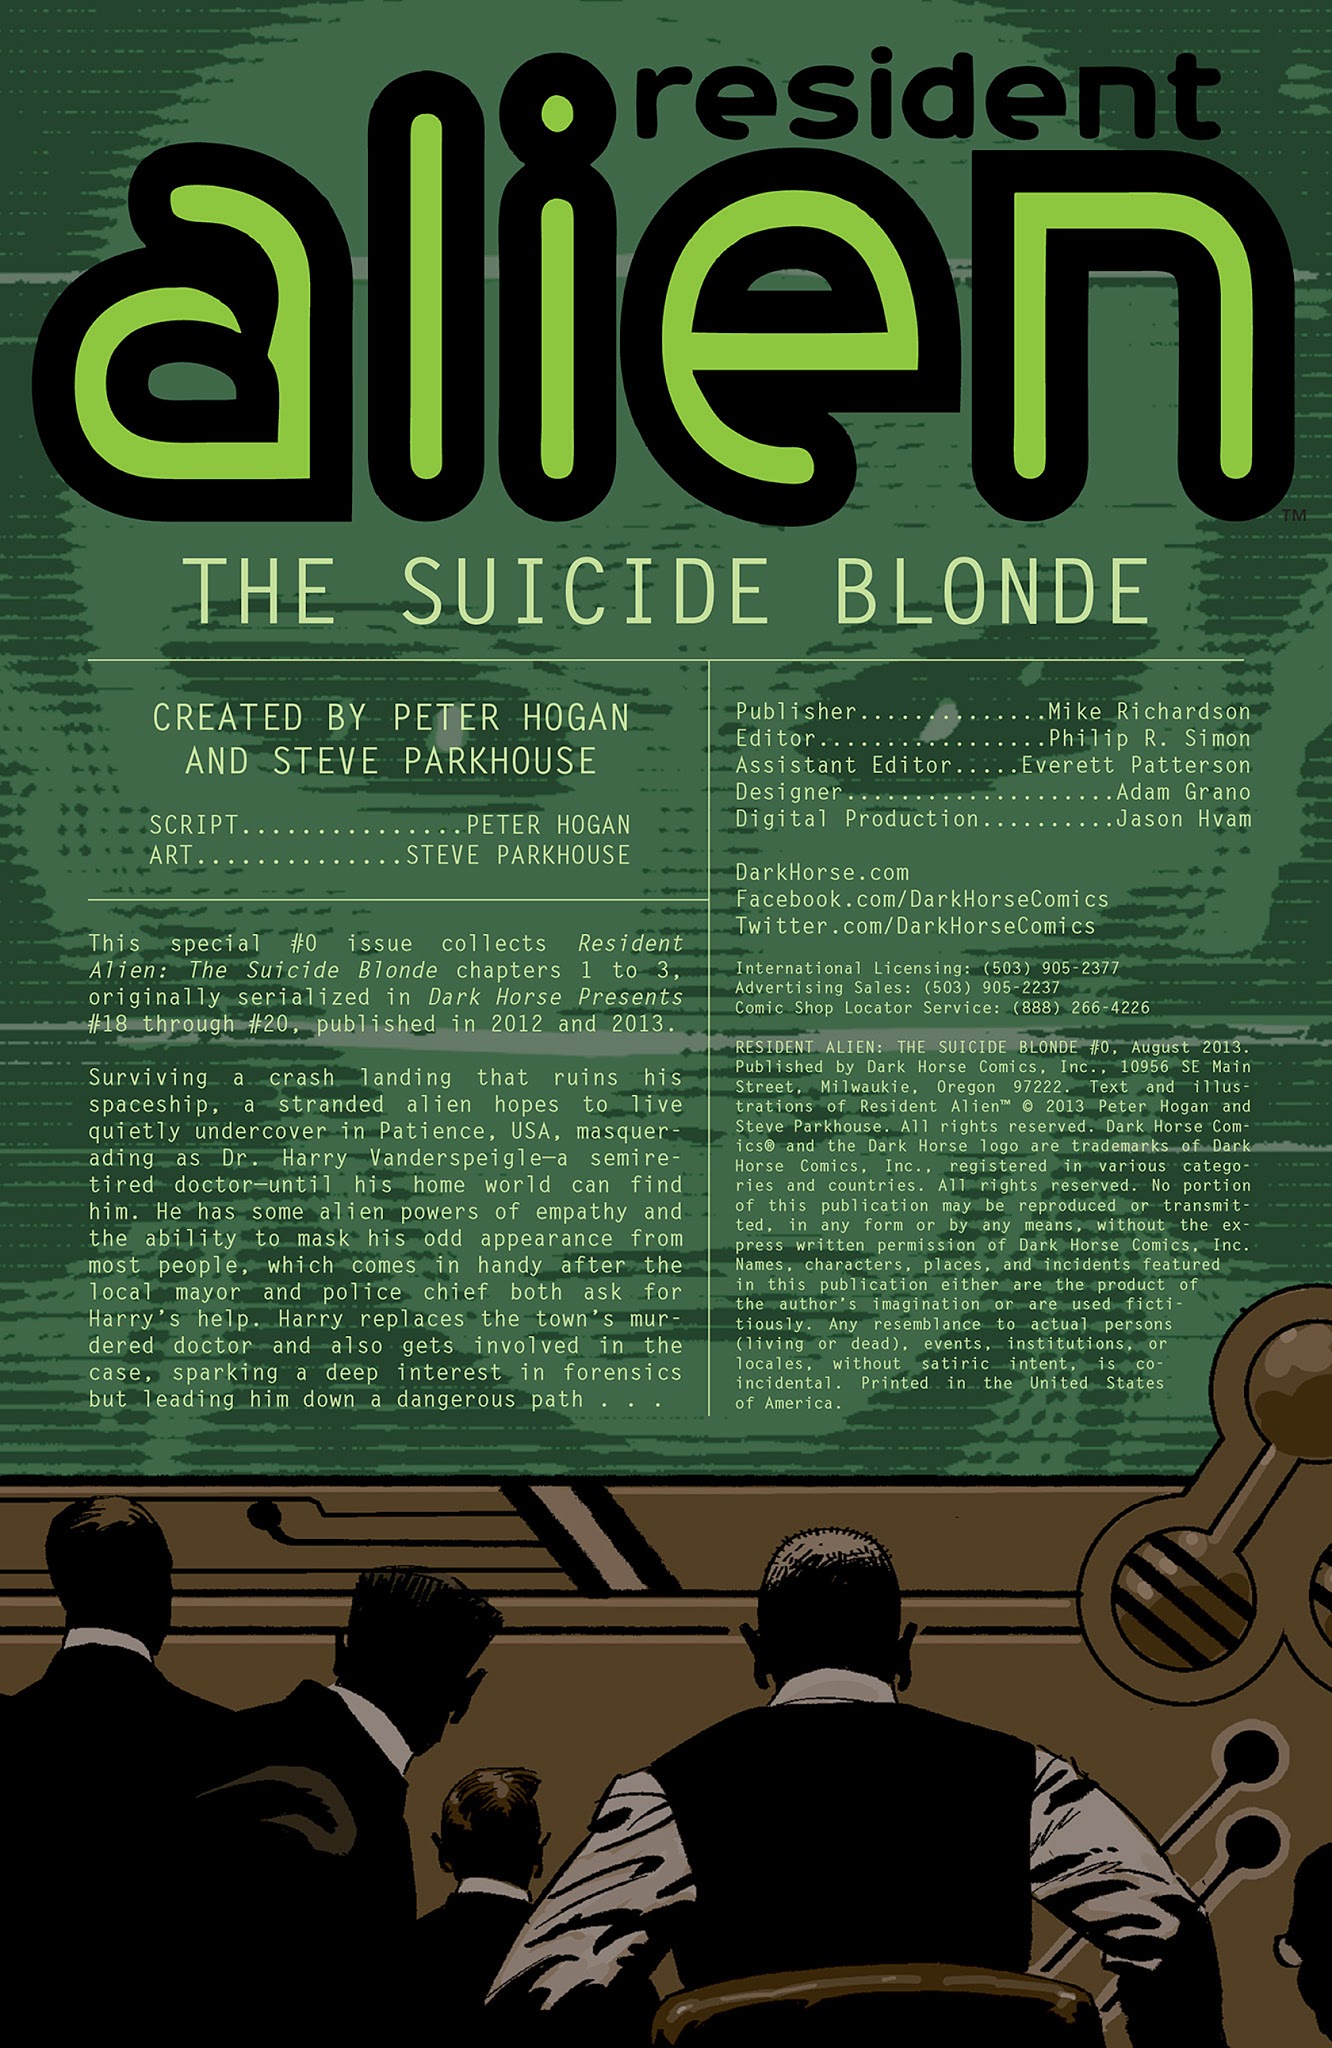 Read online Resident Alien: The Suicide Blonde comic -  Issue #0 - 2